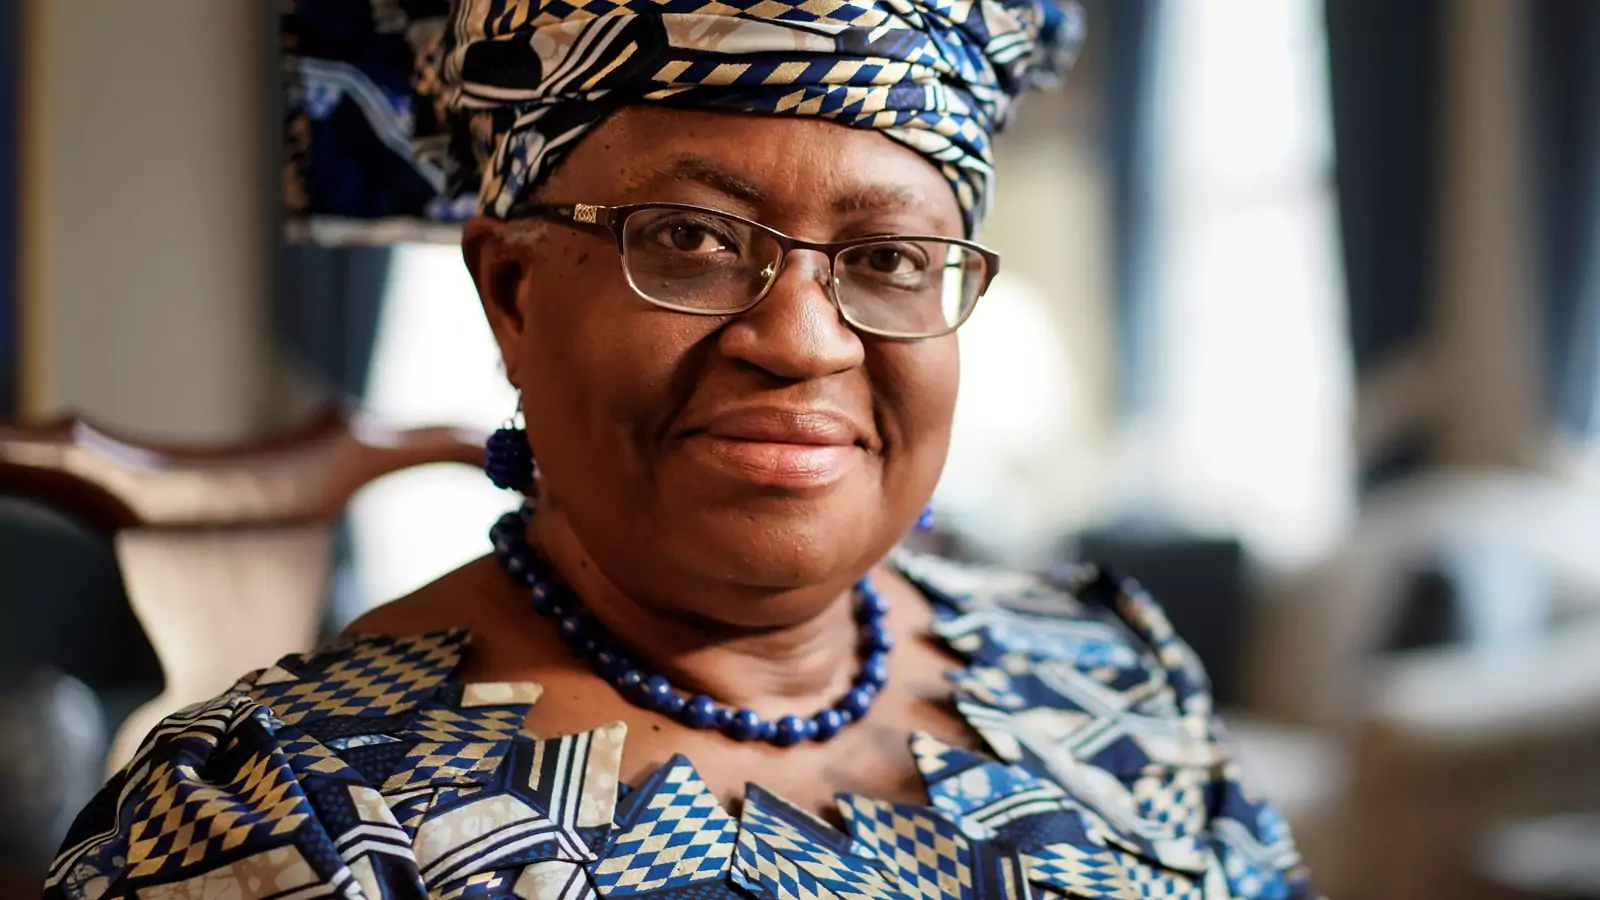 Incoming World Trade Organization (WTO) Director General Ngozi Okonjo-Iweala speaks during an interview with Reuters in Potomac, Maryland, U.S. on February 15, 2021.